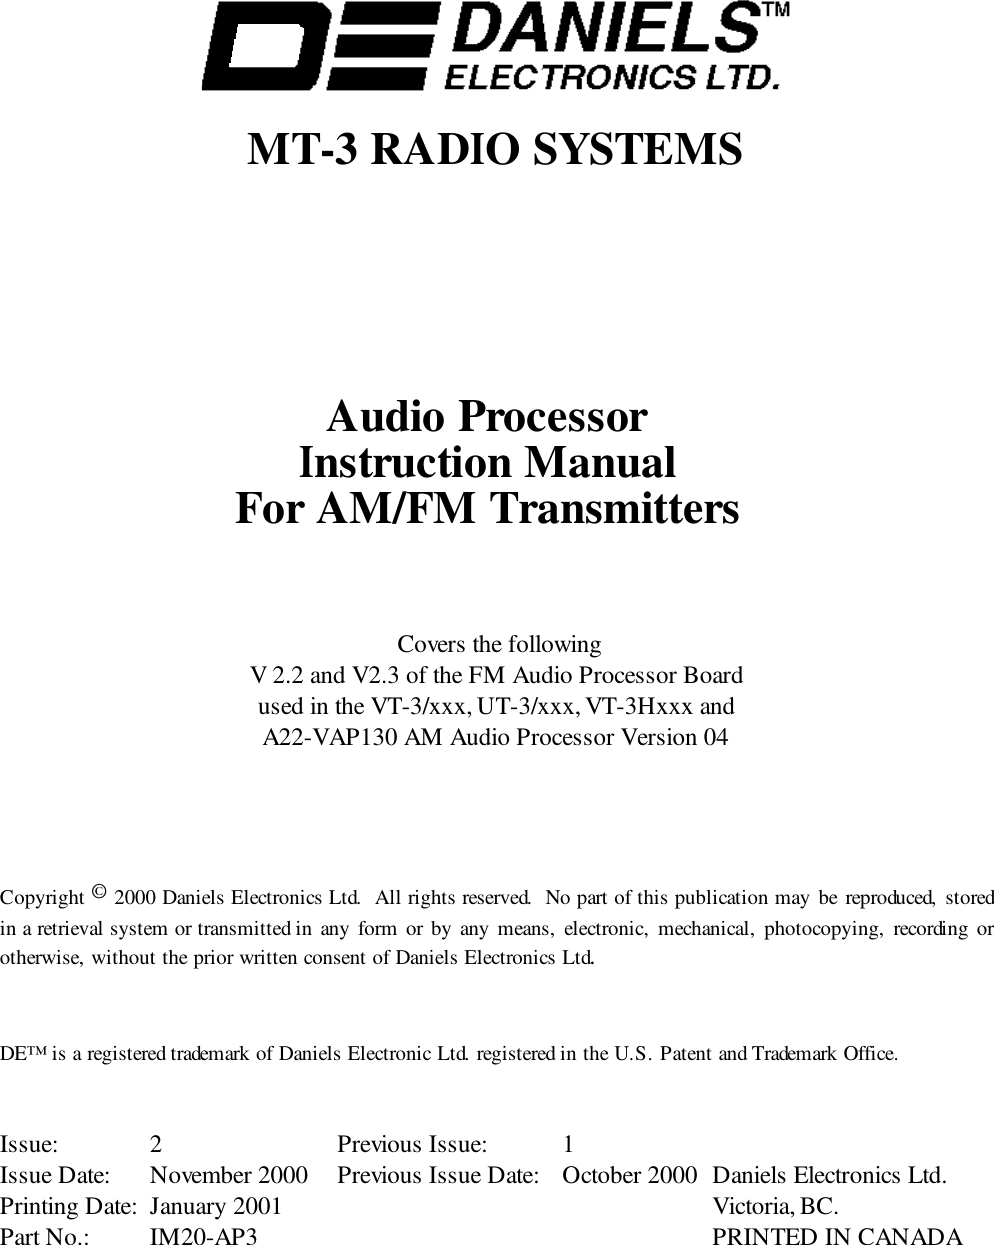 MT-3 RADIO SYSTEMSAudio ProcessorInstruction ManualFor AM/FM Transmitters Covers the followingV 2.2 and V2.3 of the FM Audio Processor Boardused in the VT-3/xxx, UT-3/xxx, VT-3Hxxx andA22-VAP130 AM Audio Processor Version 04Copyright © 2000 Daniels Electronics Ltd.  All rights reserved.  No part of this publication may be reproduced, storedin a retrieval system or transmitted in any form or by any means, electronic, mechanical, photocopying, recording orotherwise, without the prior written consent of Daniels Electronics Ltd.DE™ is a registered trademark of Daniels Electronic Ltd. registered in the U.S. Patent and Trademark Office.Issue: 2 Previous Issue:  1Issue Date: November 2000 Previous Issue Date: October 2000 Daniels Electronics Ltd.Printing Date: January 2001 Victoria, BC.Part No.: IM20-AP3 PRINTED IN CANADA